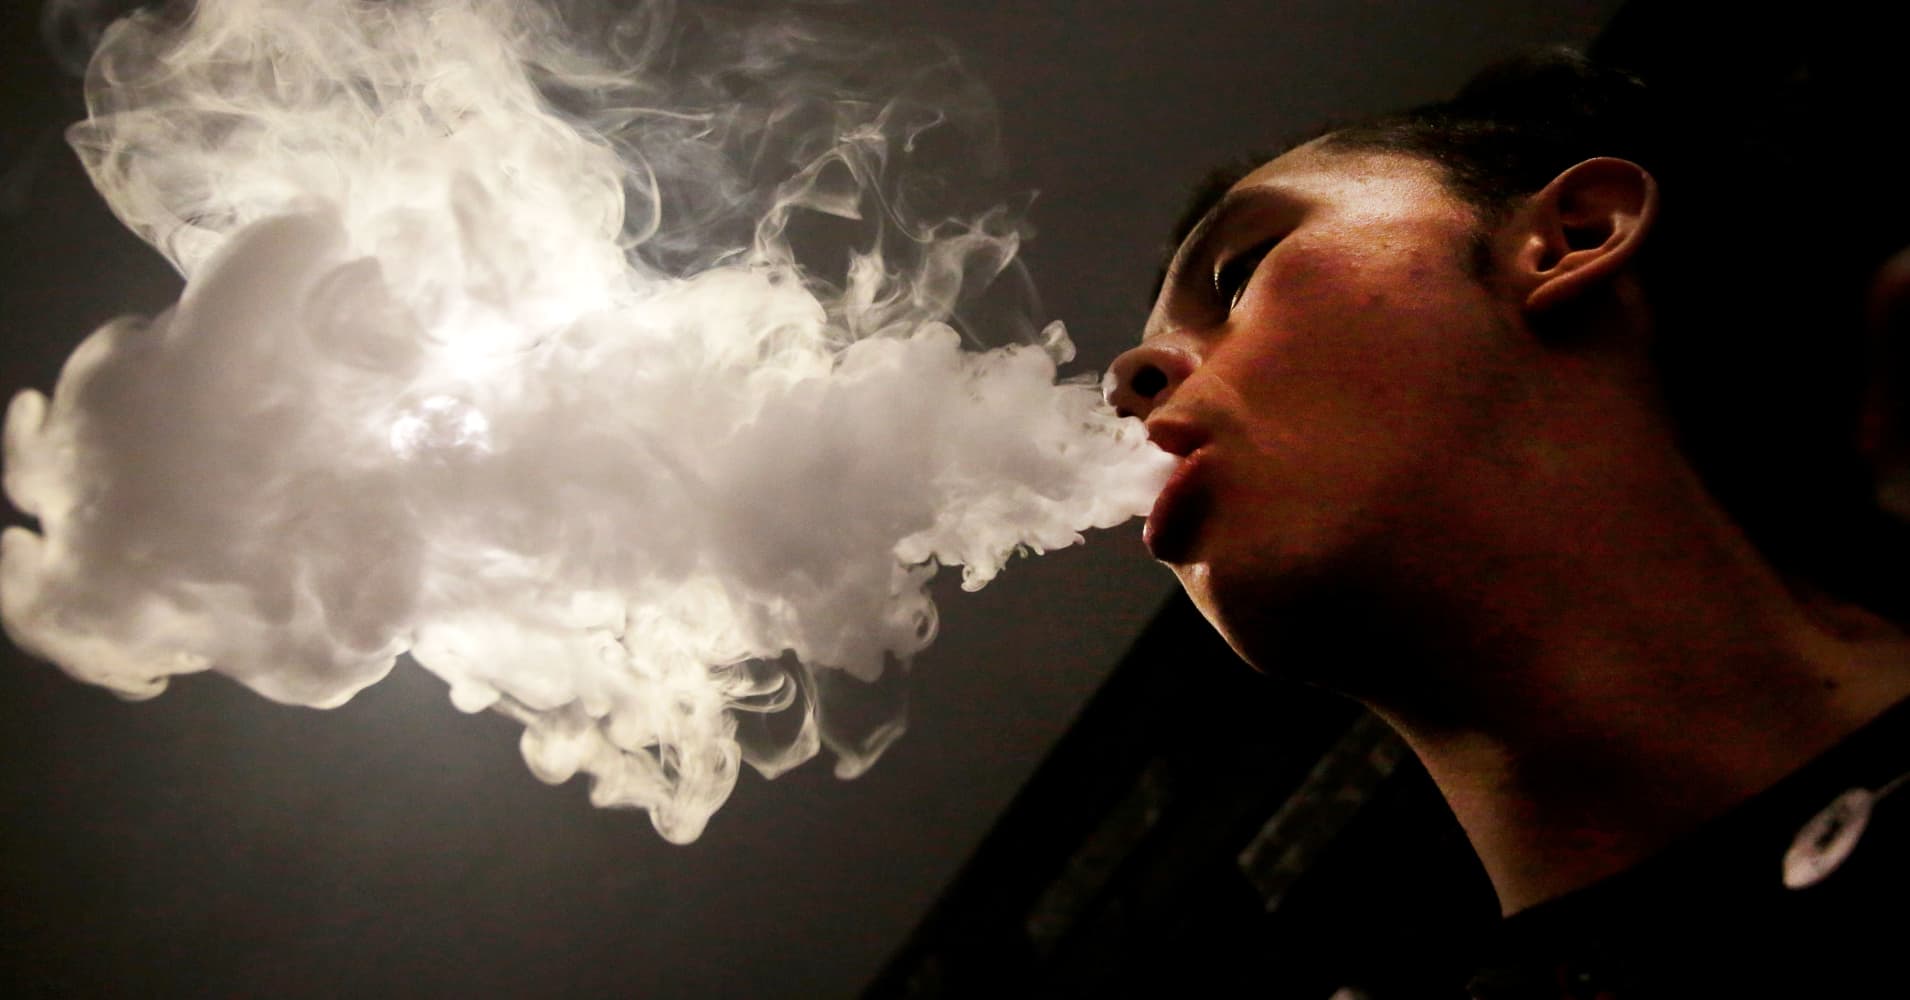 FDA outlines e-cigarette rules, tightens restrictions on fruity flavors to try to curb teen vaping